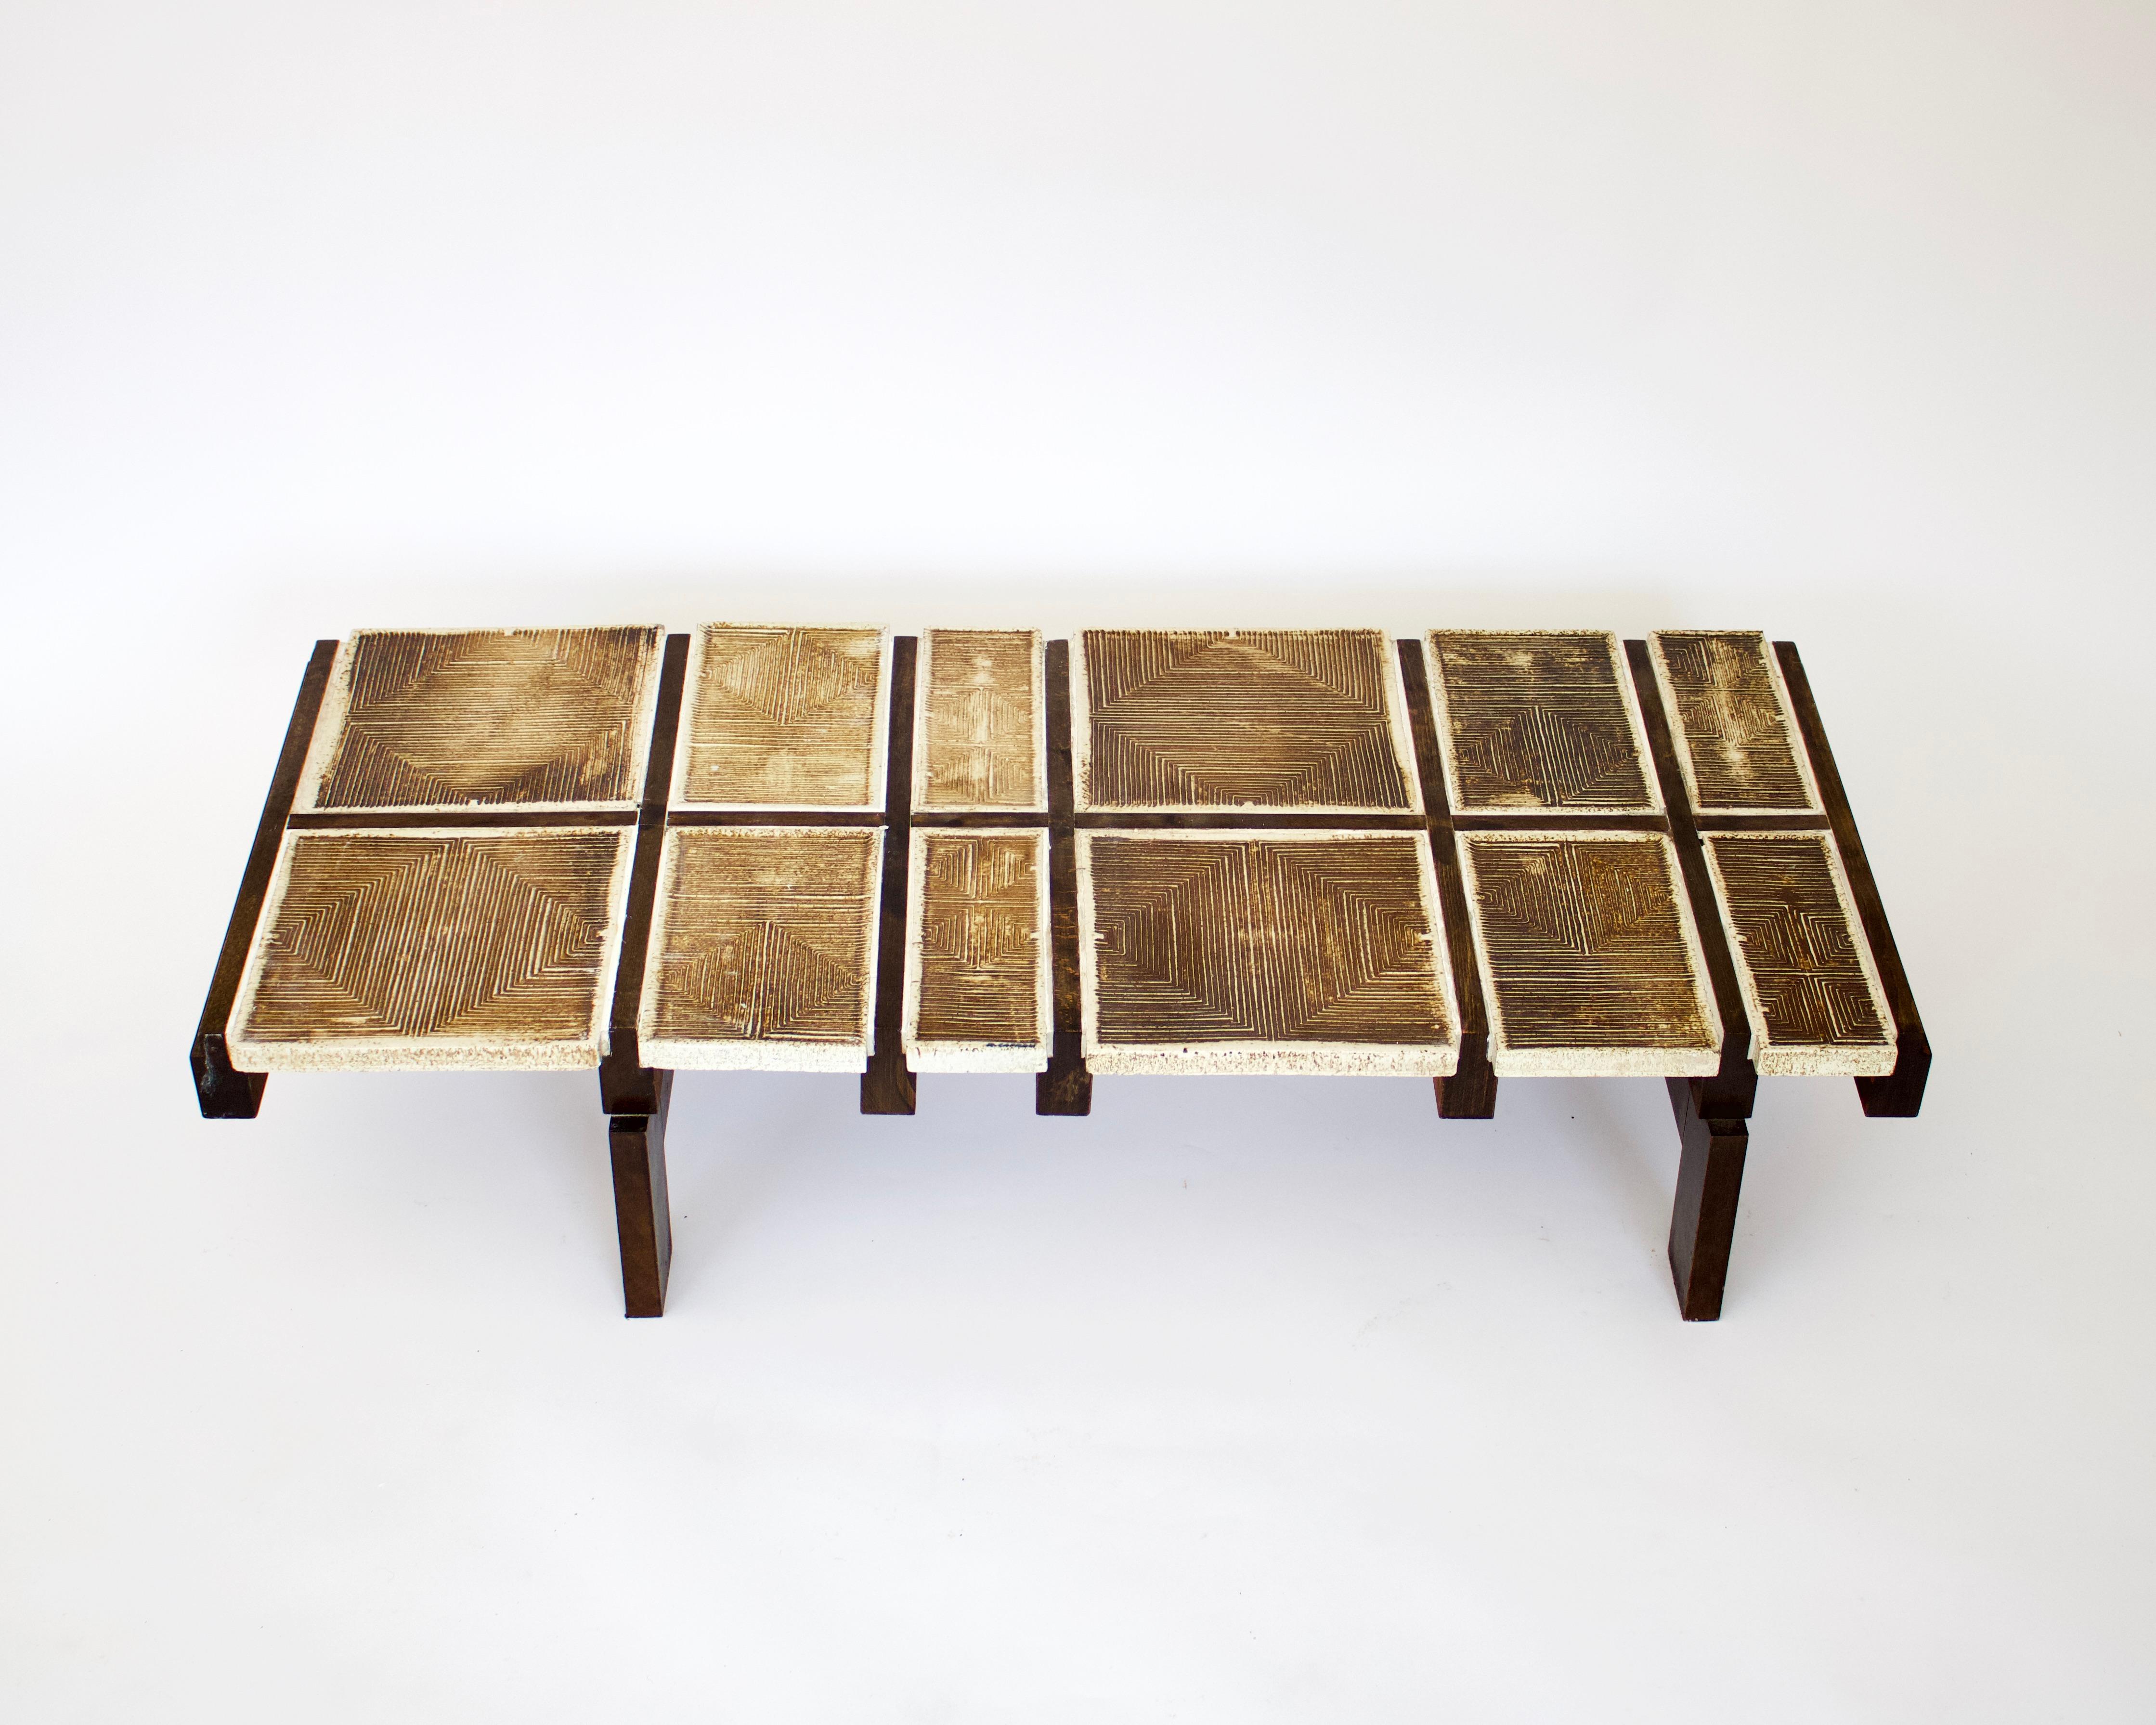 Roger Capron French Ceramic Tile Coffee Table Model Alouette Vallauris C 1970 In Good Condition For Sale In Chicago, IL